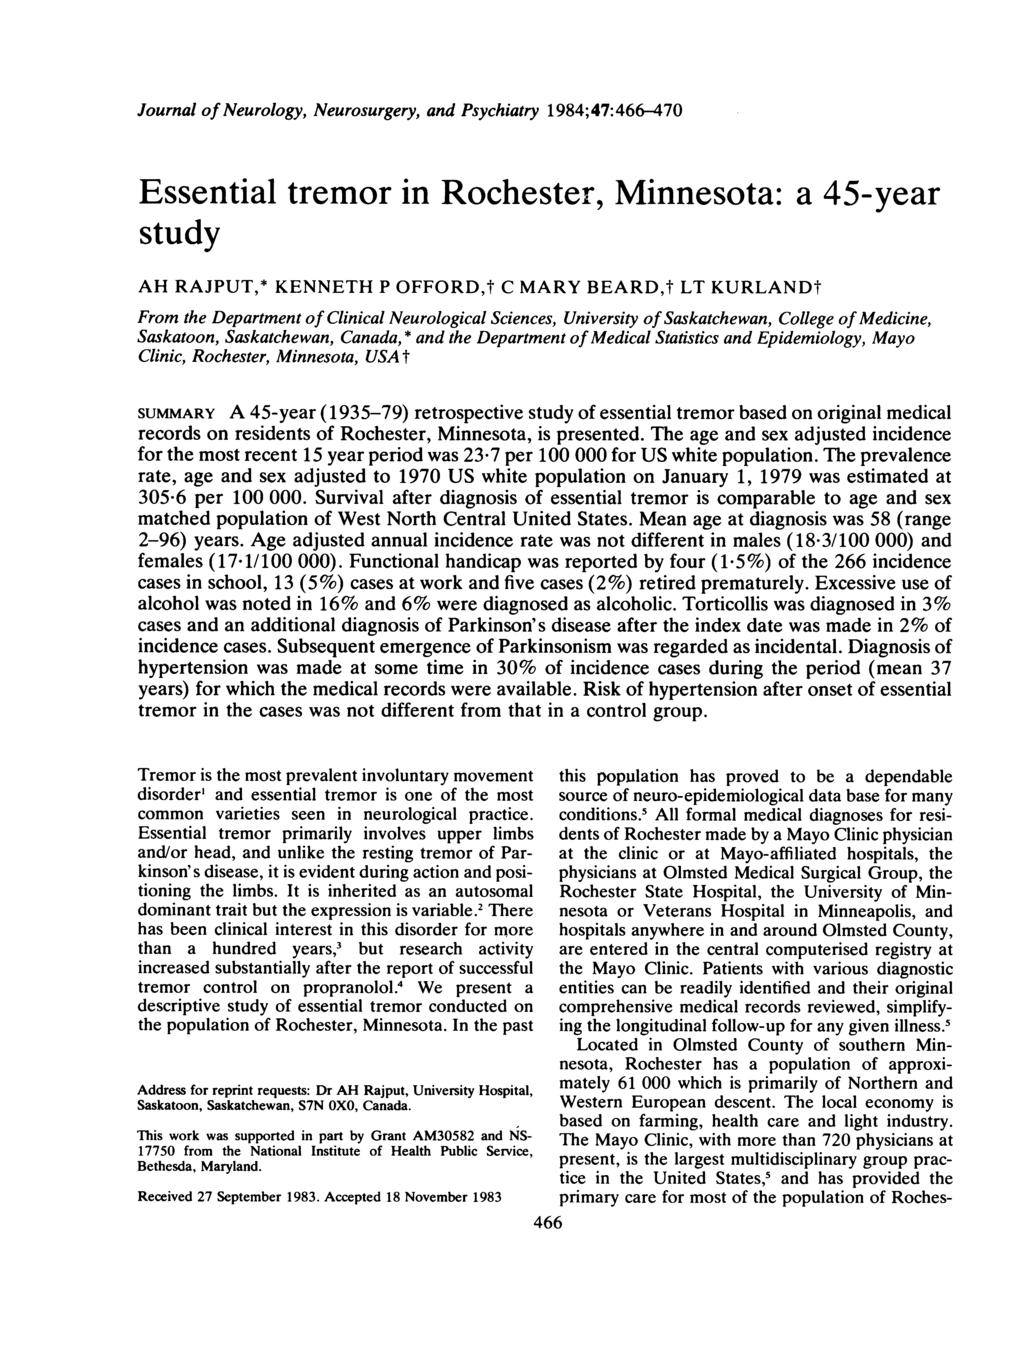 Journal of Neurology, Neurosurgery, and Psychiatry 1984;47:466-470 Essential tremor in Rochester, Minnesota: a 45-year study AH RAJPUT,* KENNETH P OFFORD,t C MARY BEARD,t LT KURLANDt From the